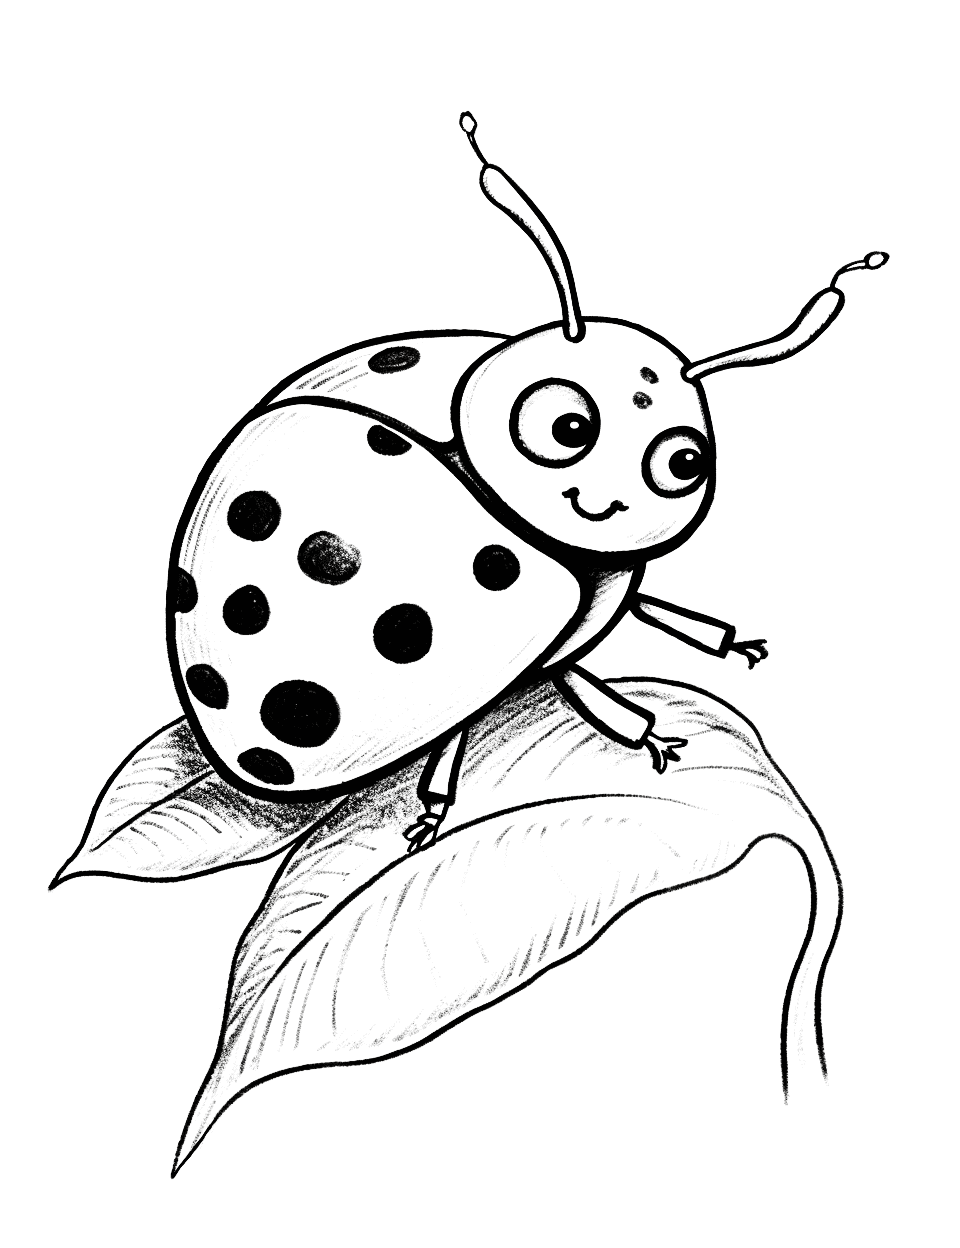 Happy Ladybug Animal Coloring Page - A cheerful ladybug with vibrant spots, sitting on a leaf.